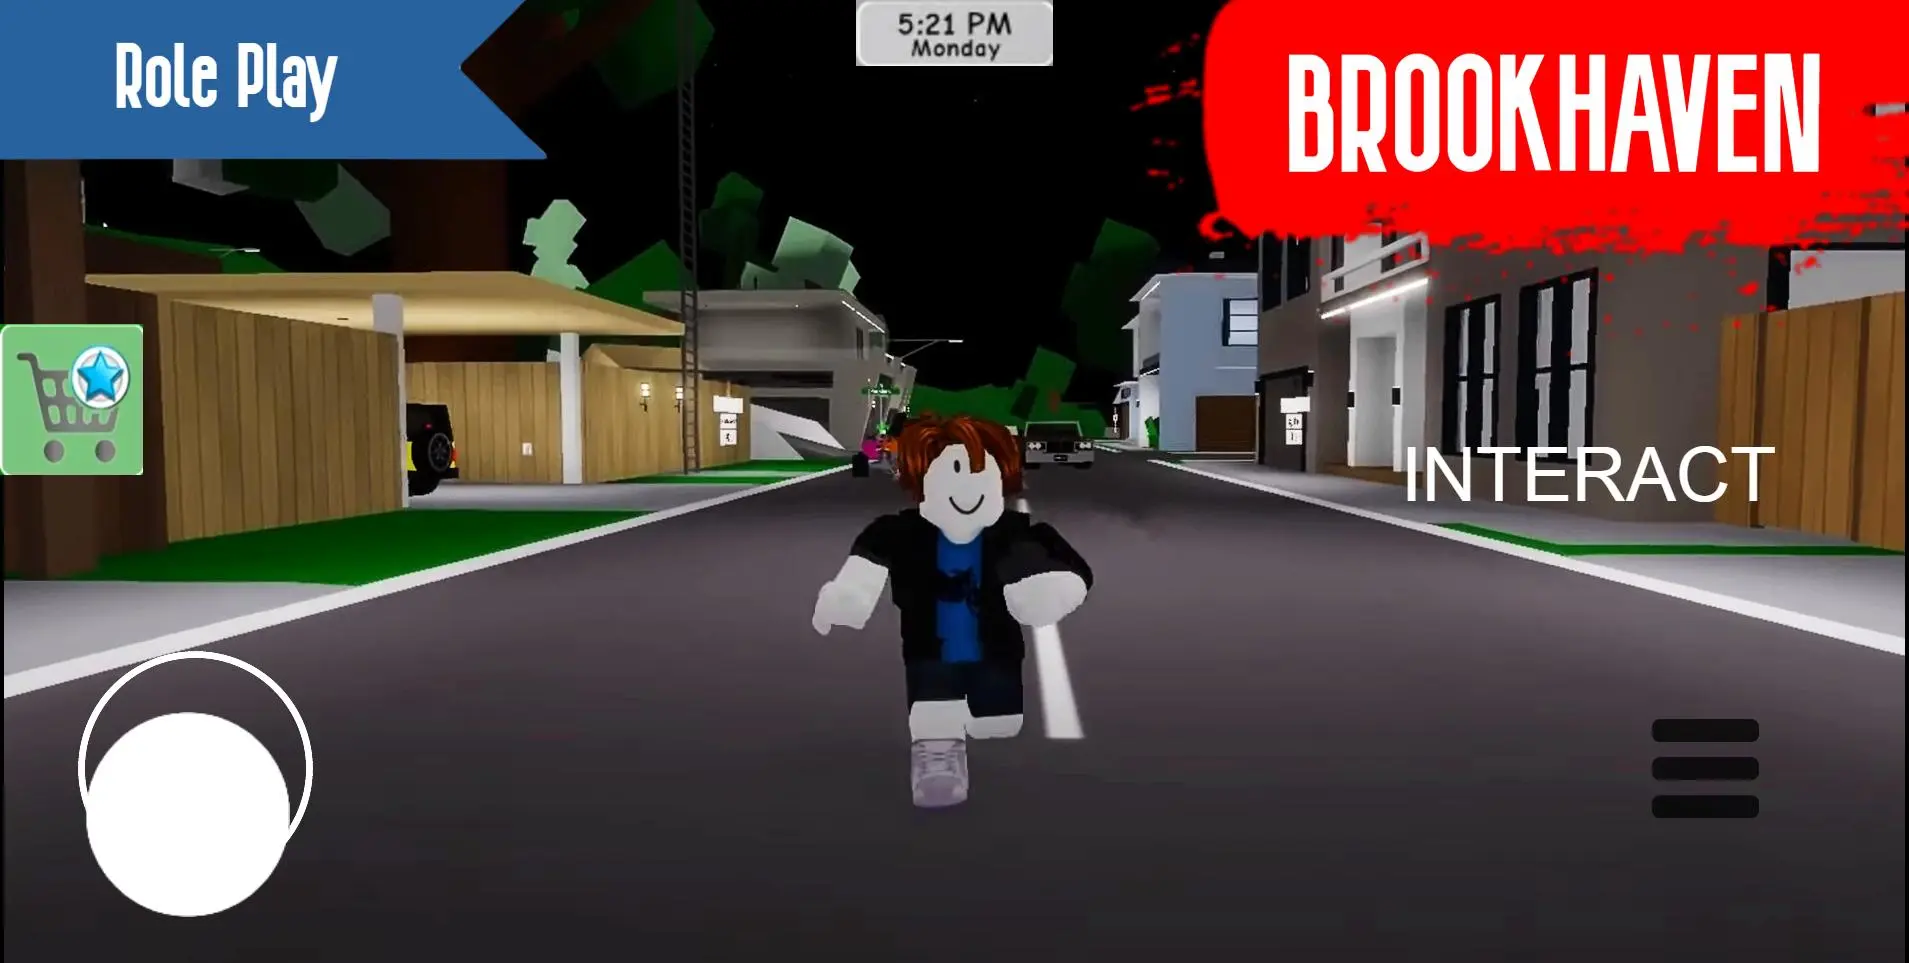 Download City Brookhaven for roblox android on PC